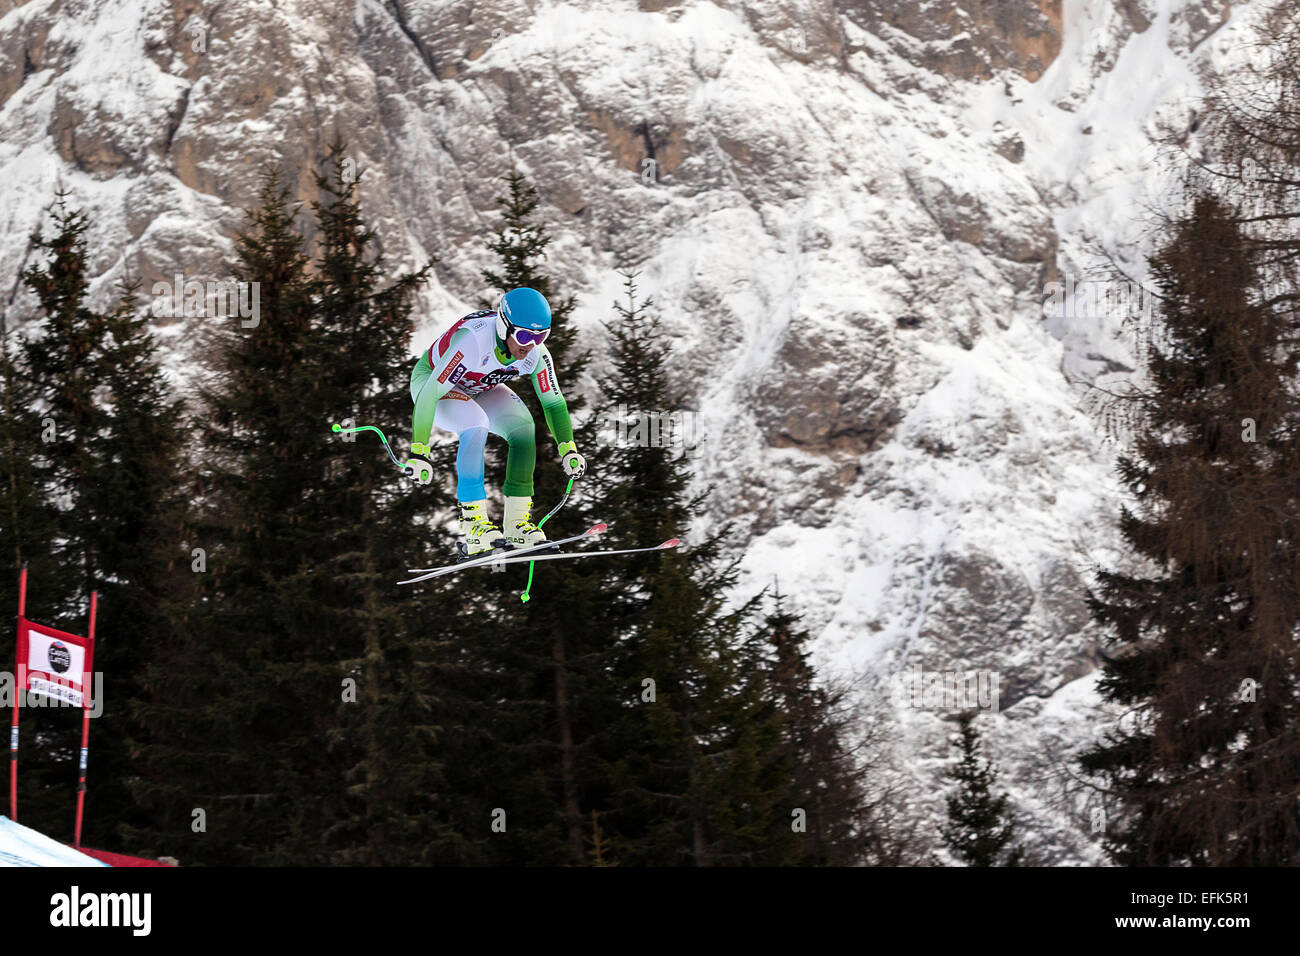 Val Gardena, Italy 19 December 2014. Perko Rok (Slo) competing in the Audi Fis Alpine Skiing World Cup Men's Downhill Race on the Saslong Course in the dolomite mountain rang Stock Photo